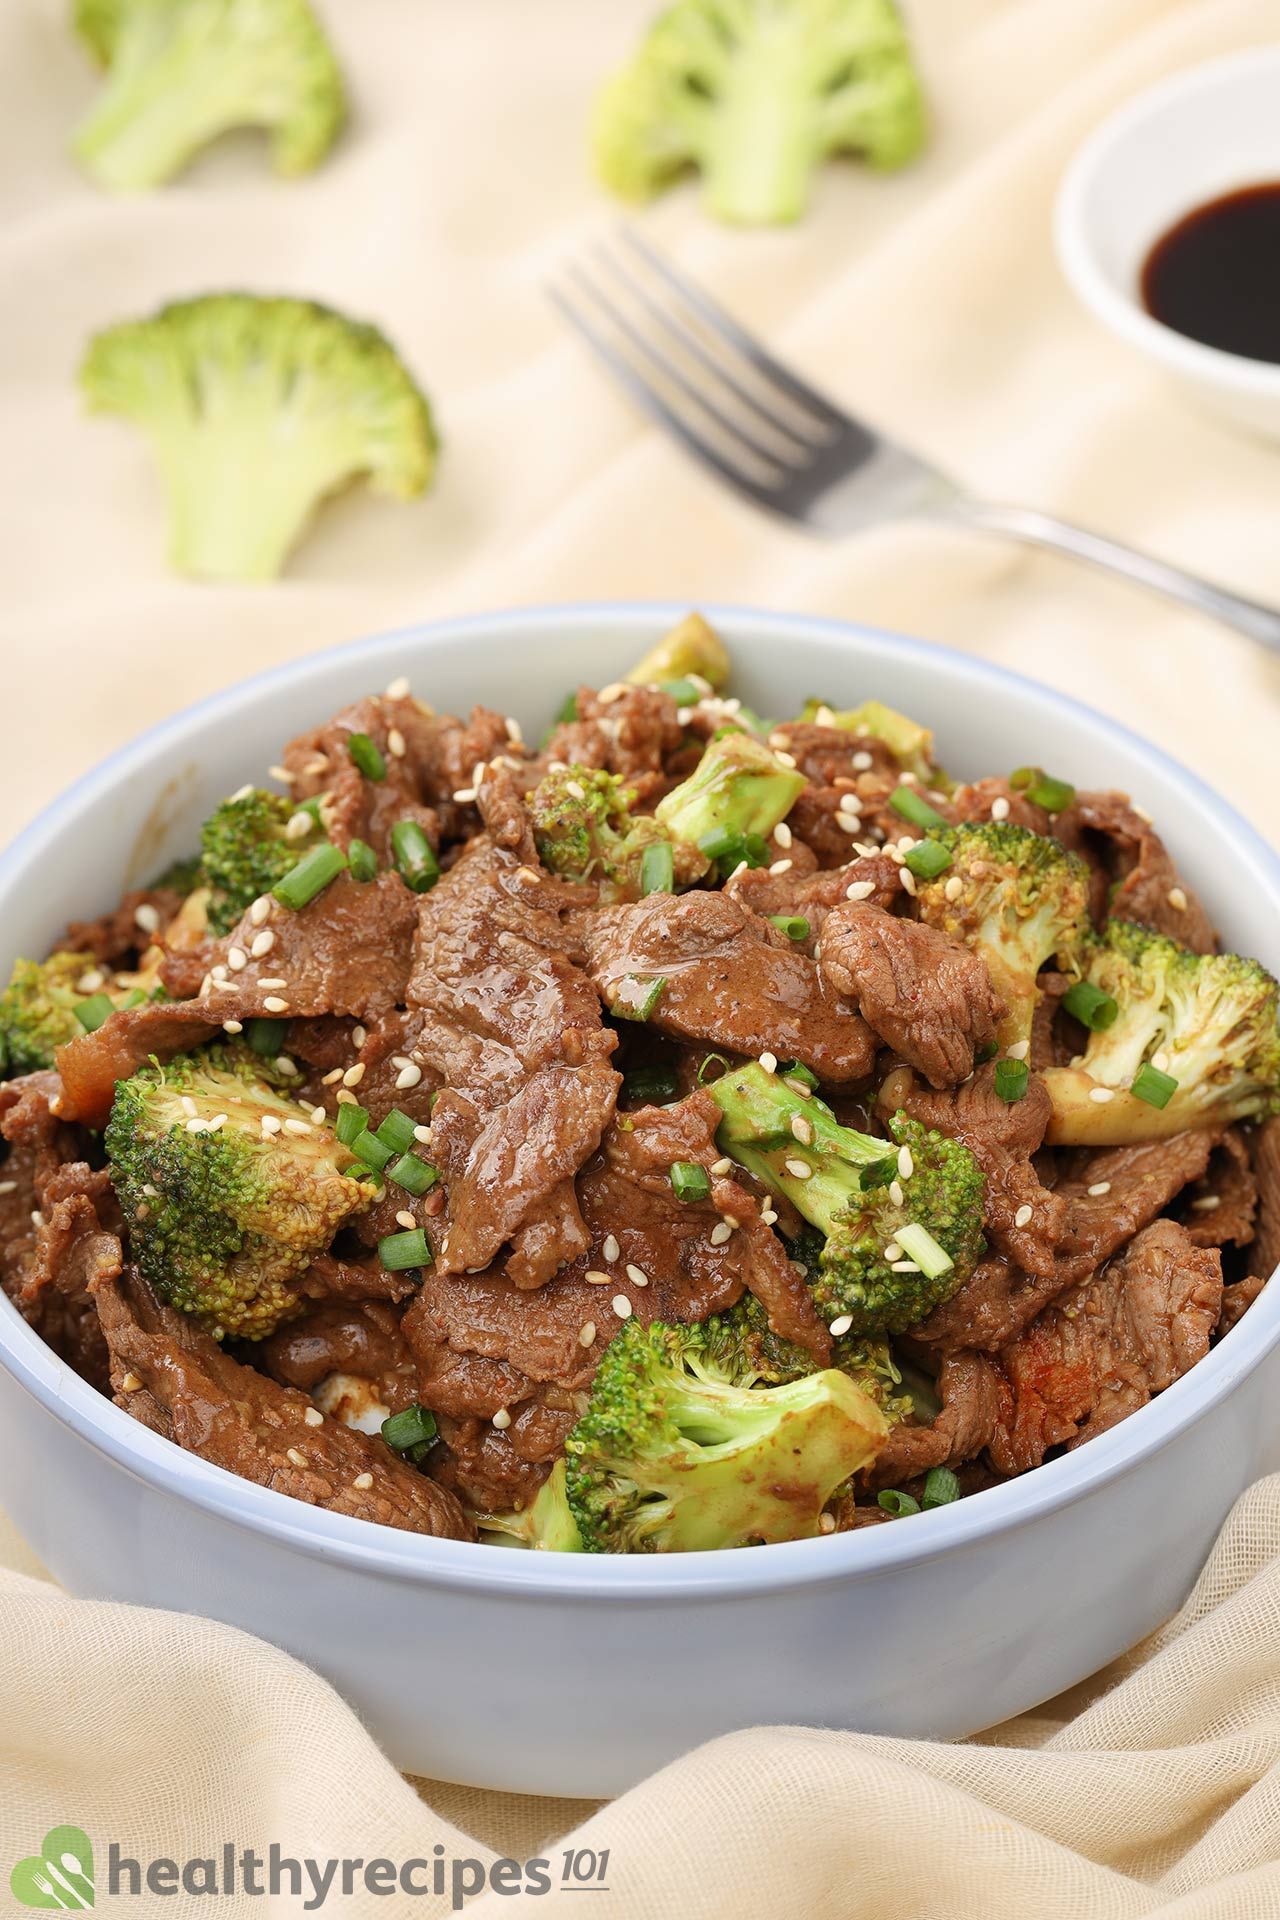 what other vegetables go well with beef and broccoli